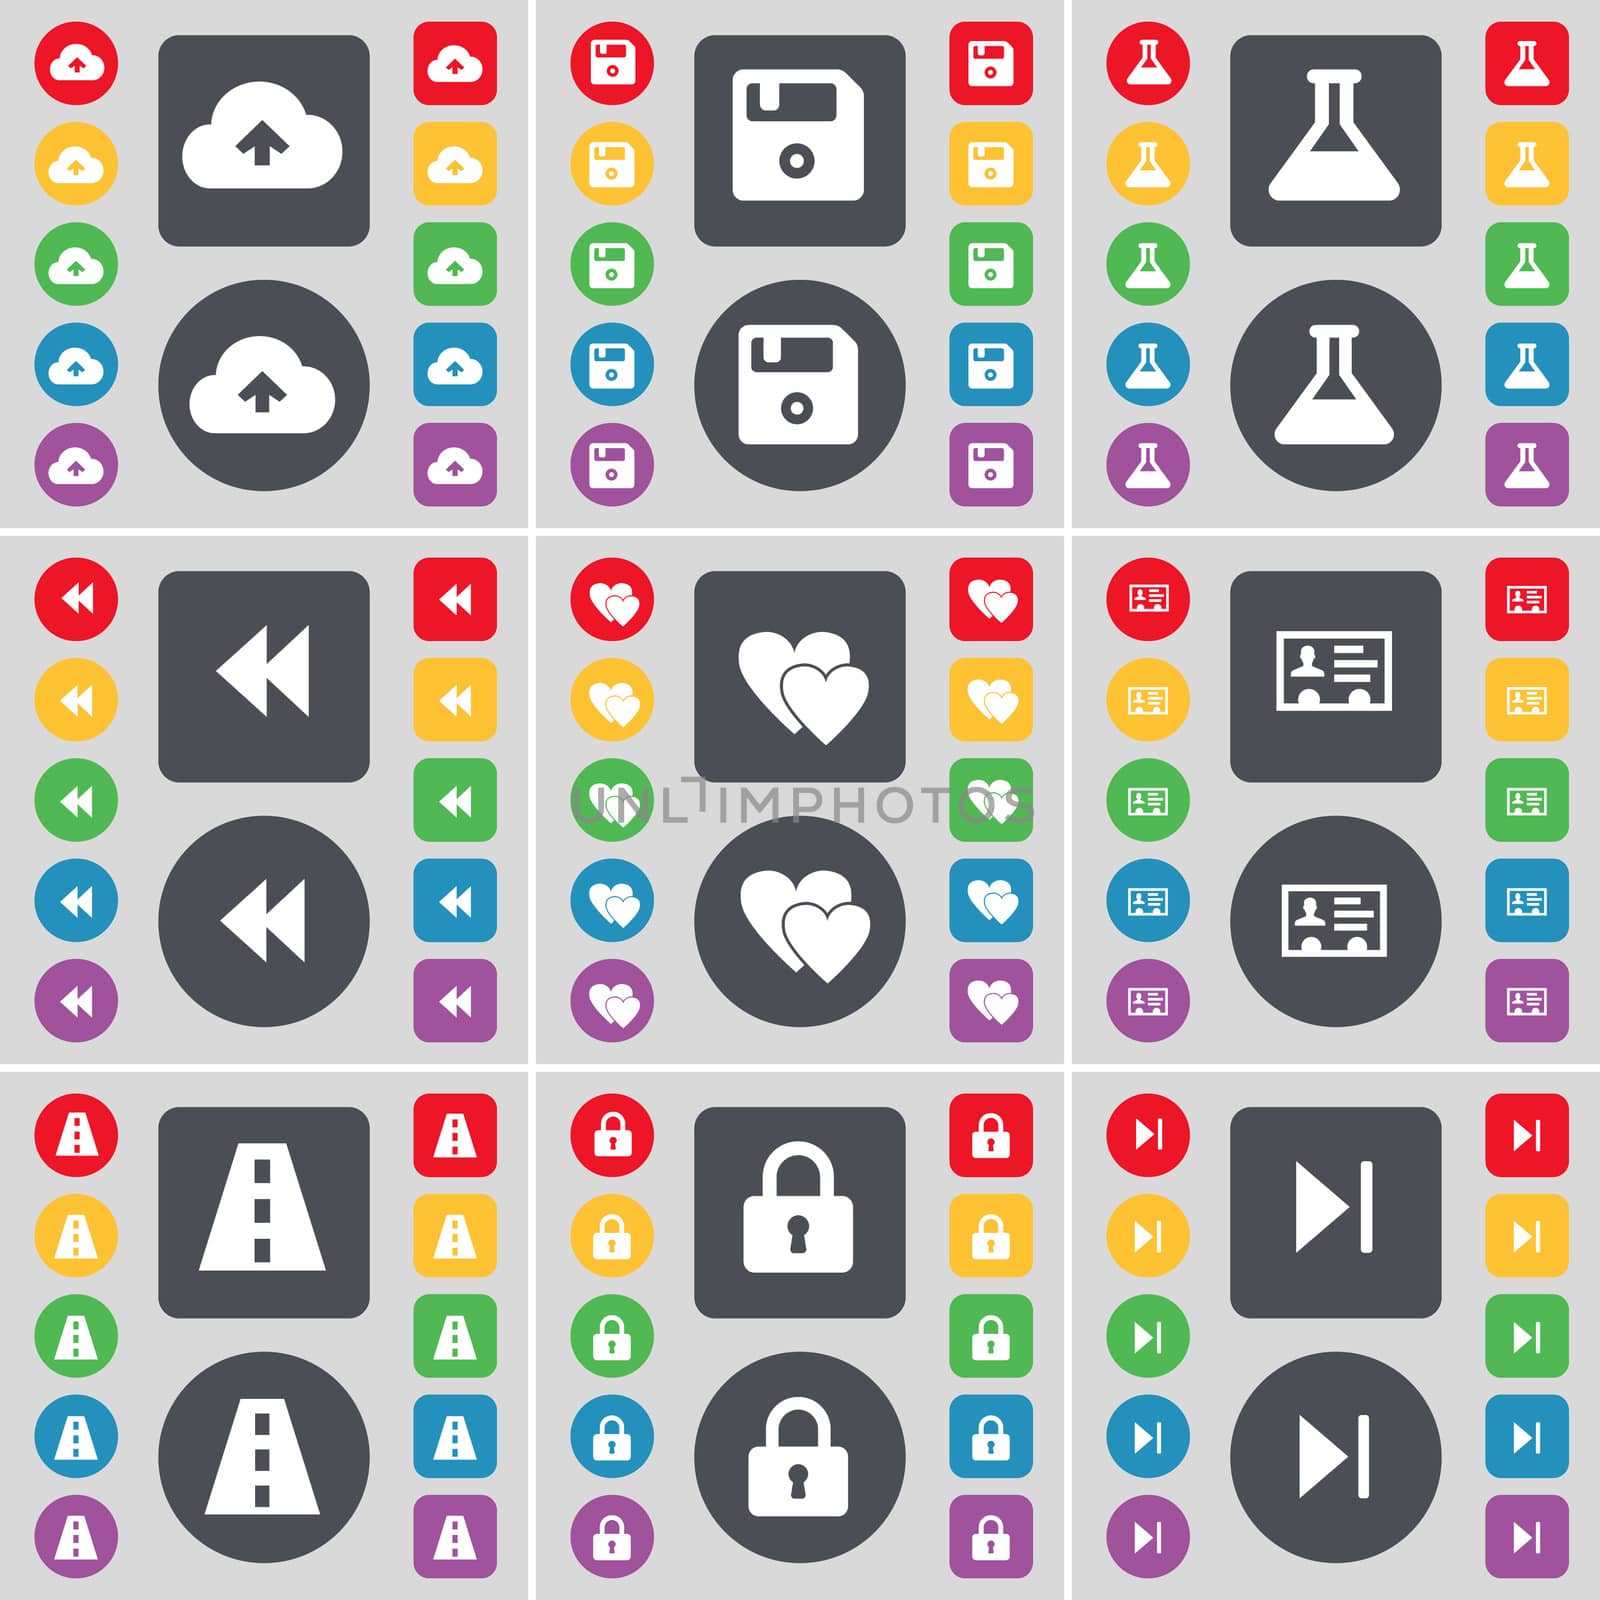 Cloud, Floppy, Flask, Rewind, Heart, Contact, Road, Lock, Media skip icon symbol. A large set of flat, colored buttons for your design.  by serhii_lohvyniuk